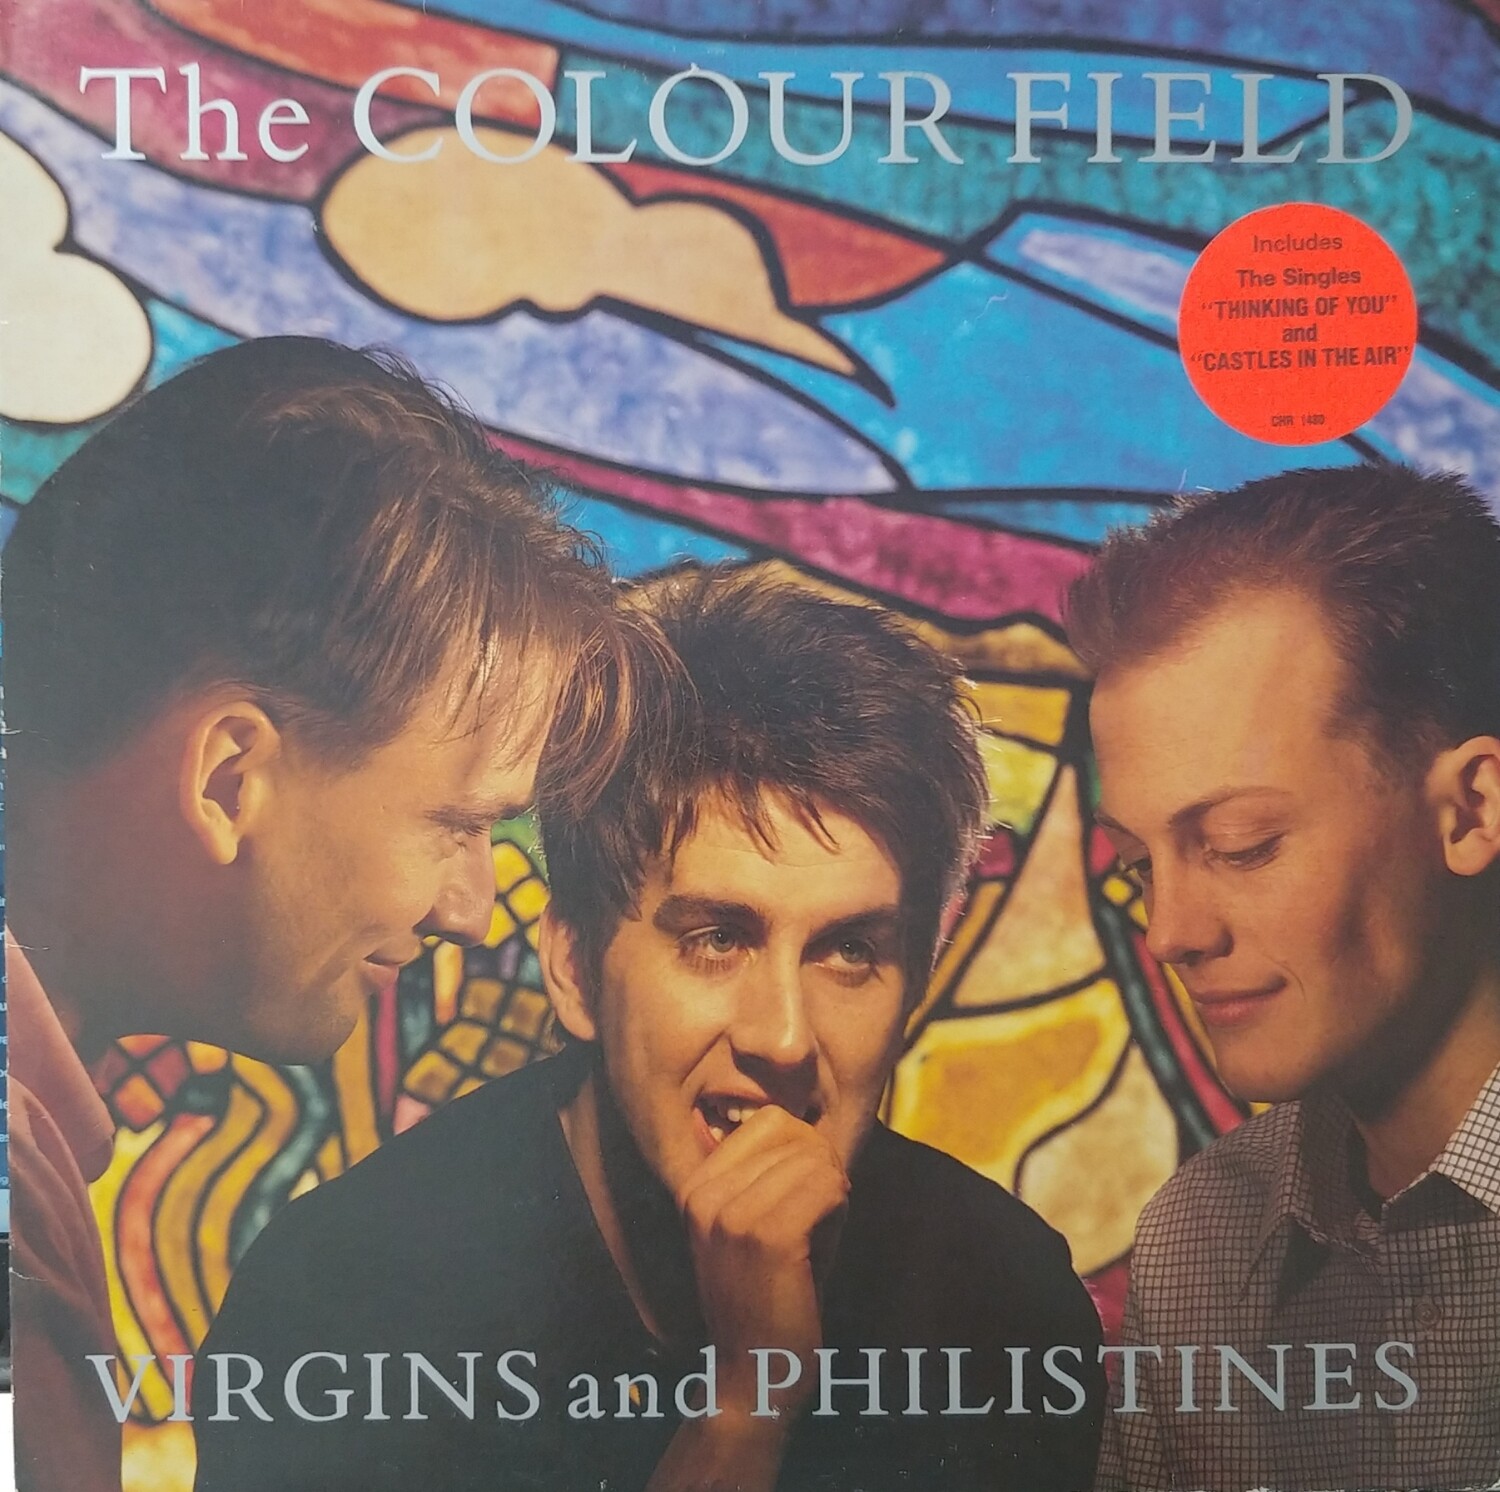 The Colour Field - Virgins and Philistines